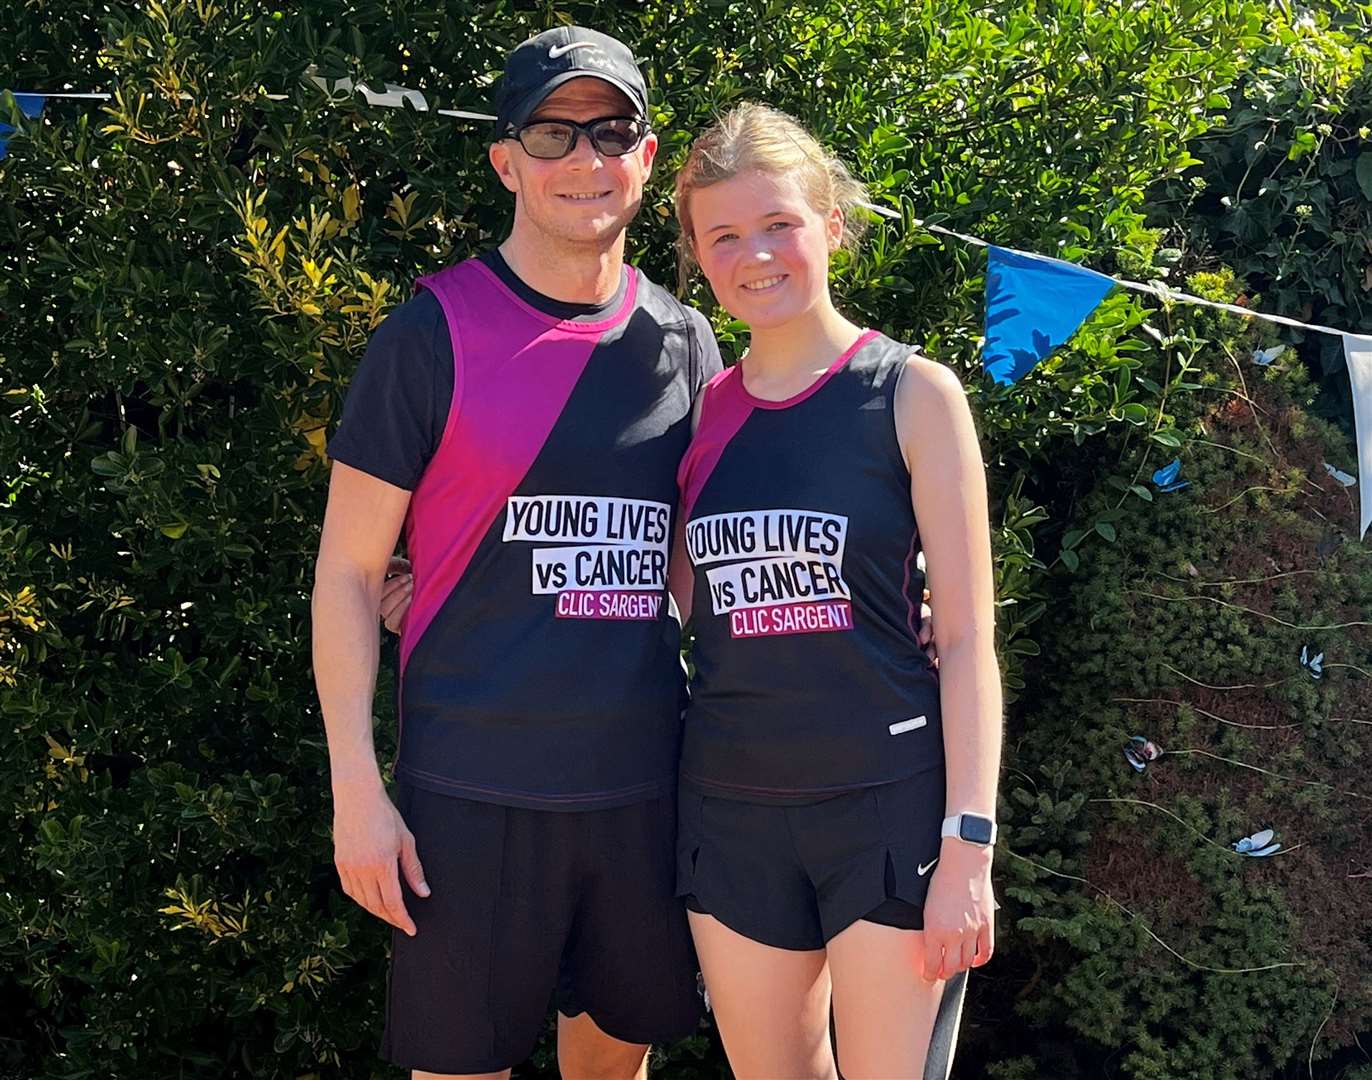 Amelia Baulch, from Bexleyheath, and her dad David will run the London Marathon 14 years on from Amelia's cancer diagnosis